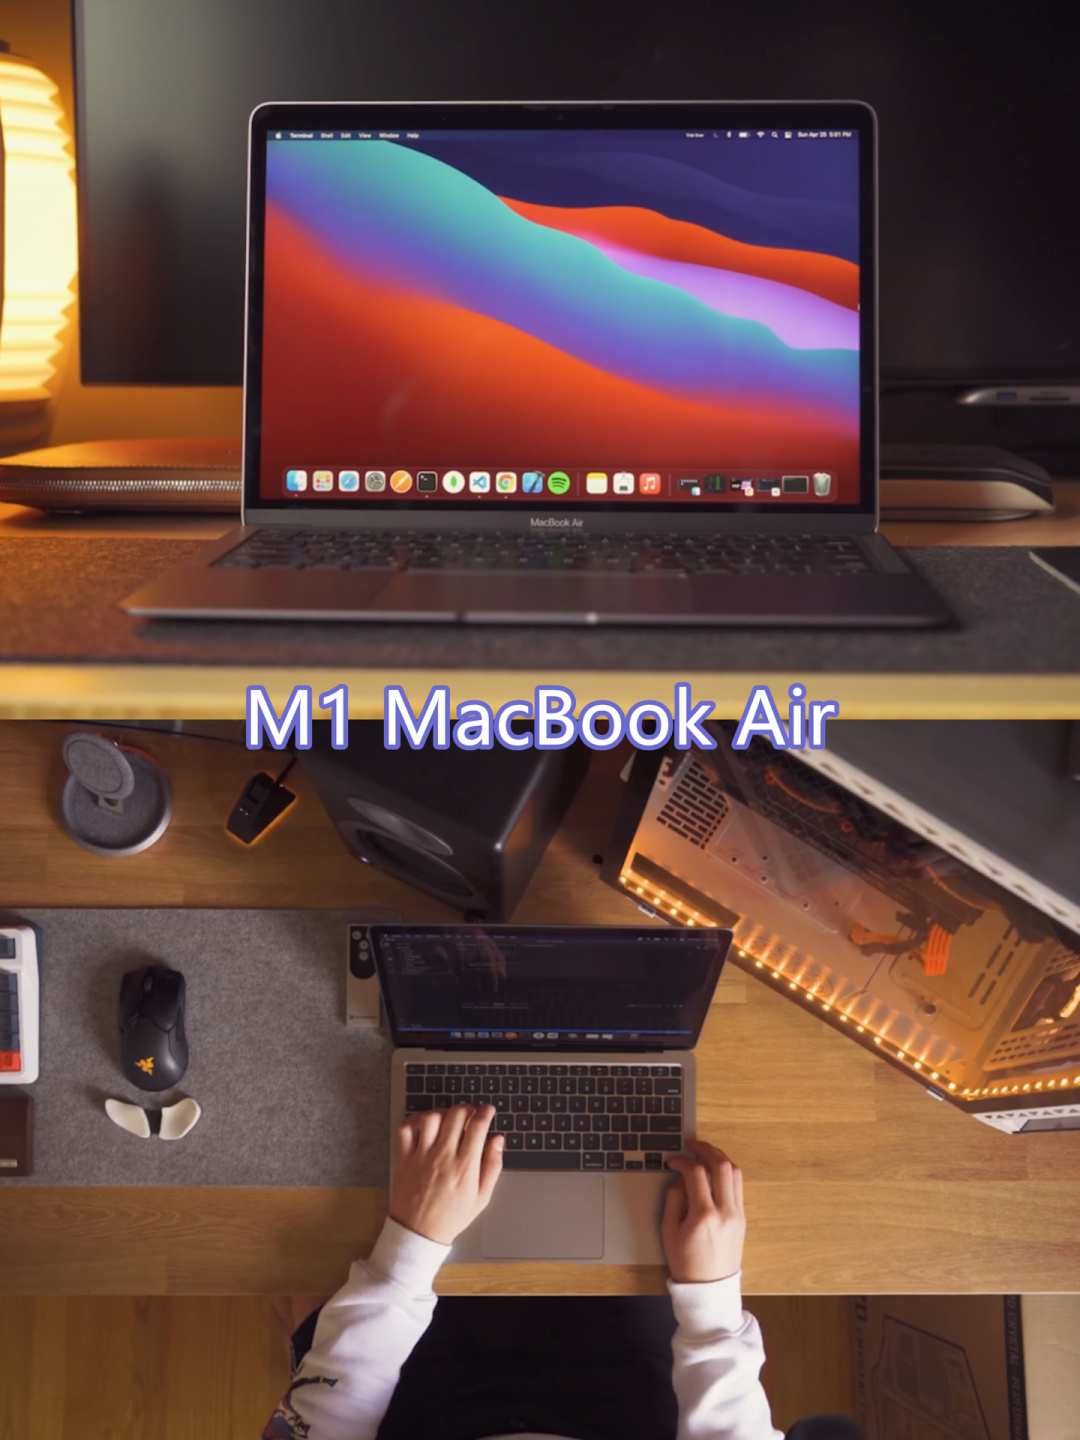 Is the MacBook Air with M1 chip worth buying? RedTom good things